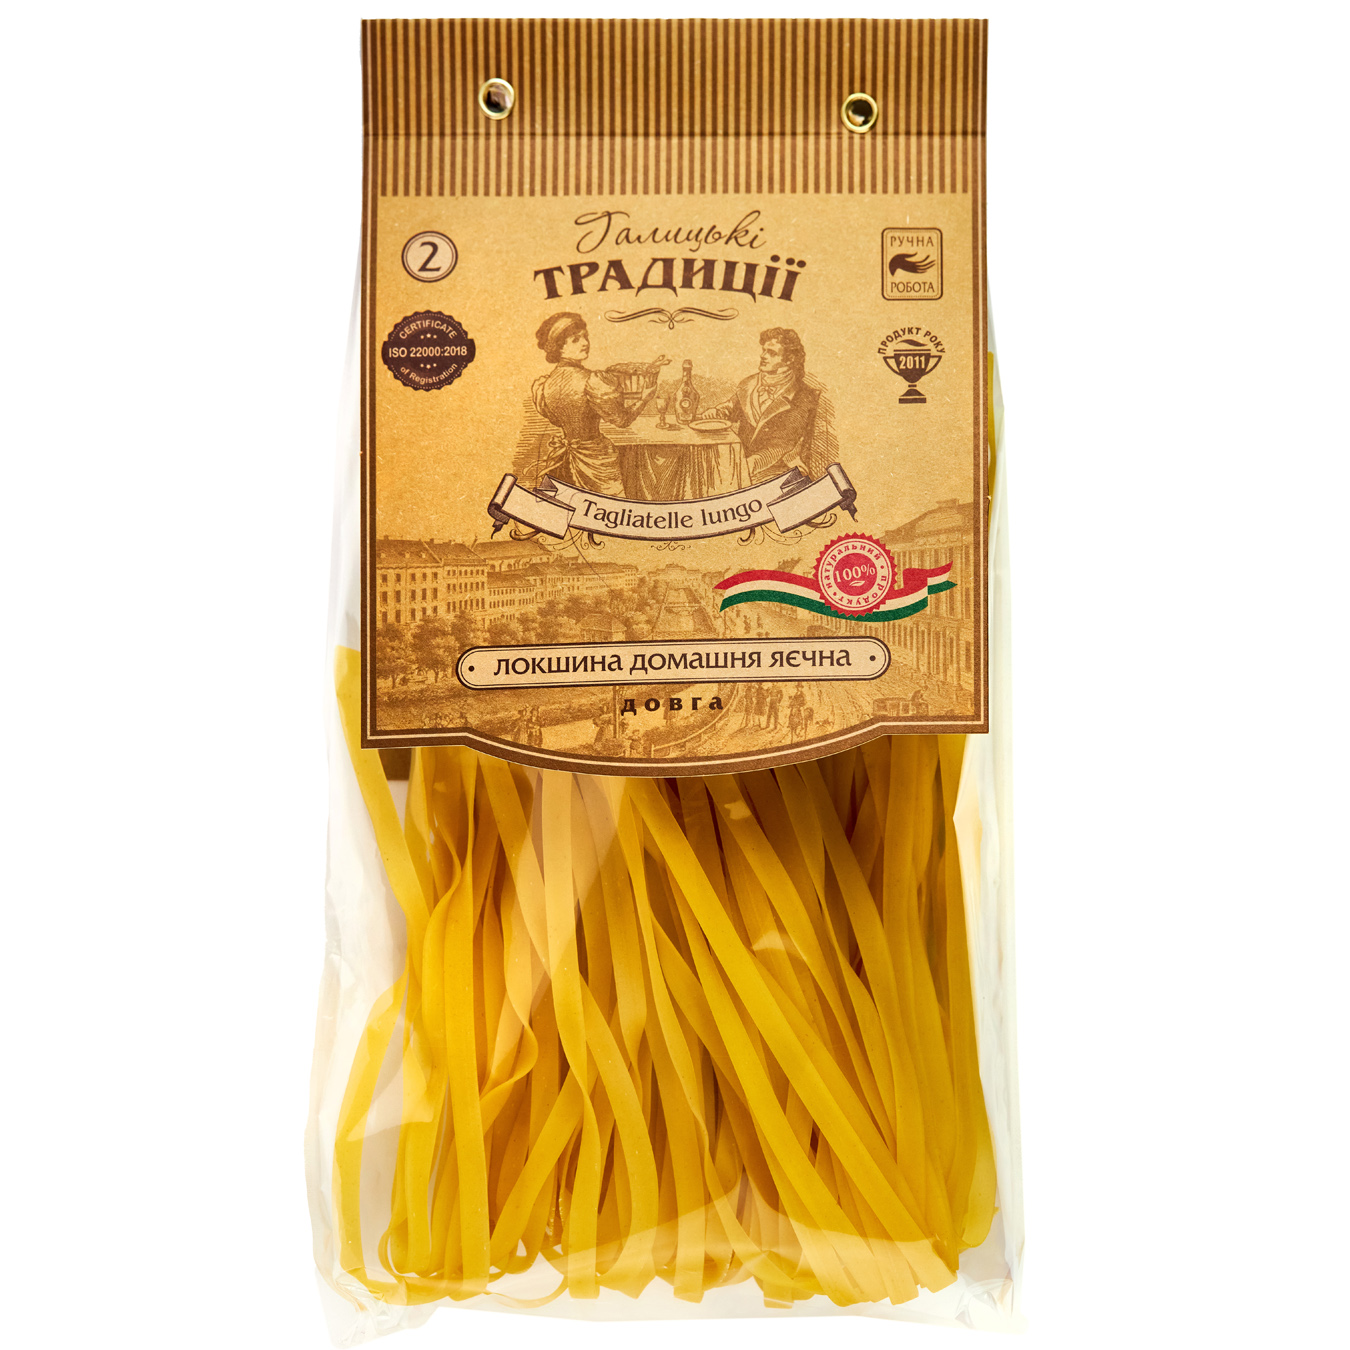 Homemade egg noodles Galician traditions 250g